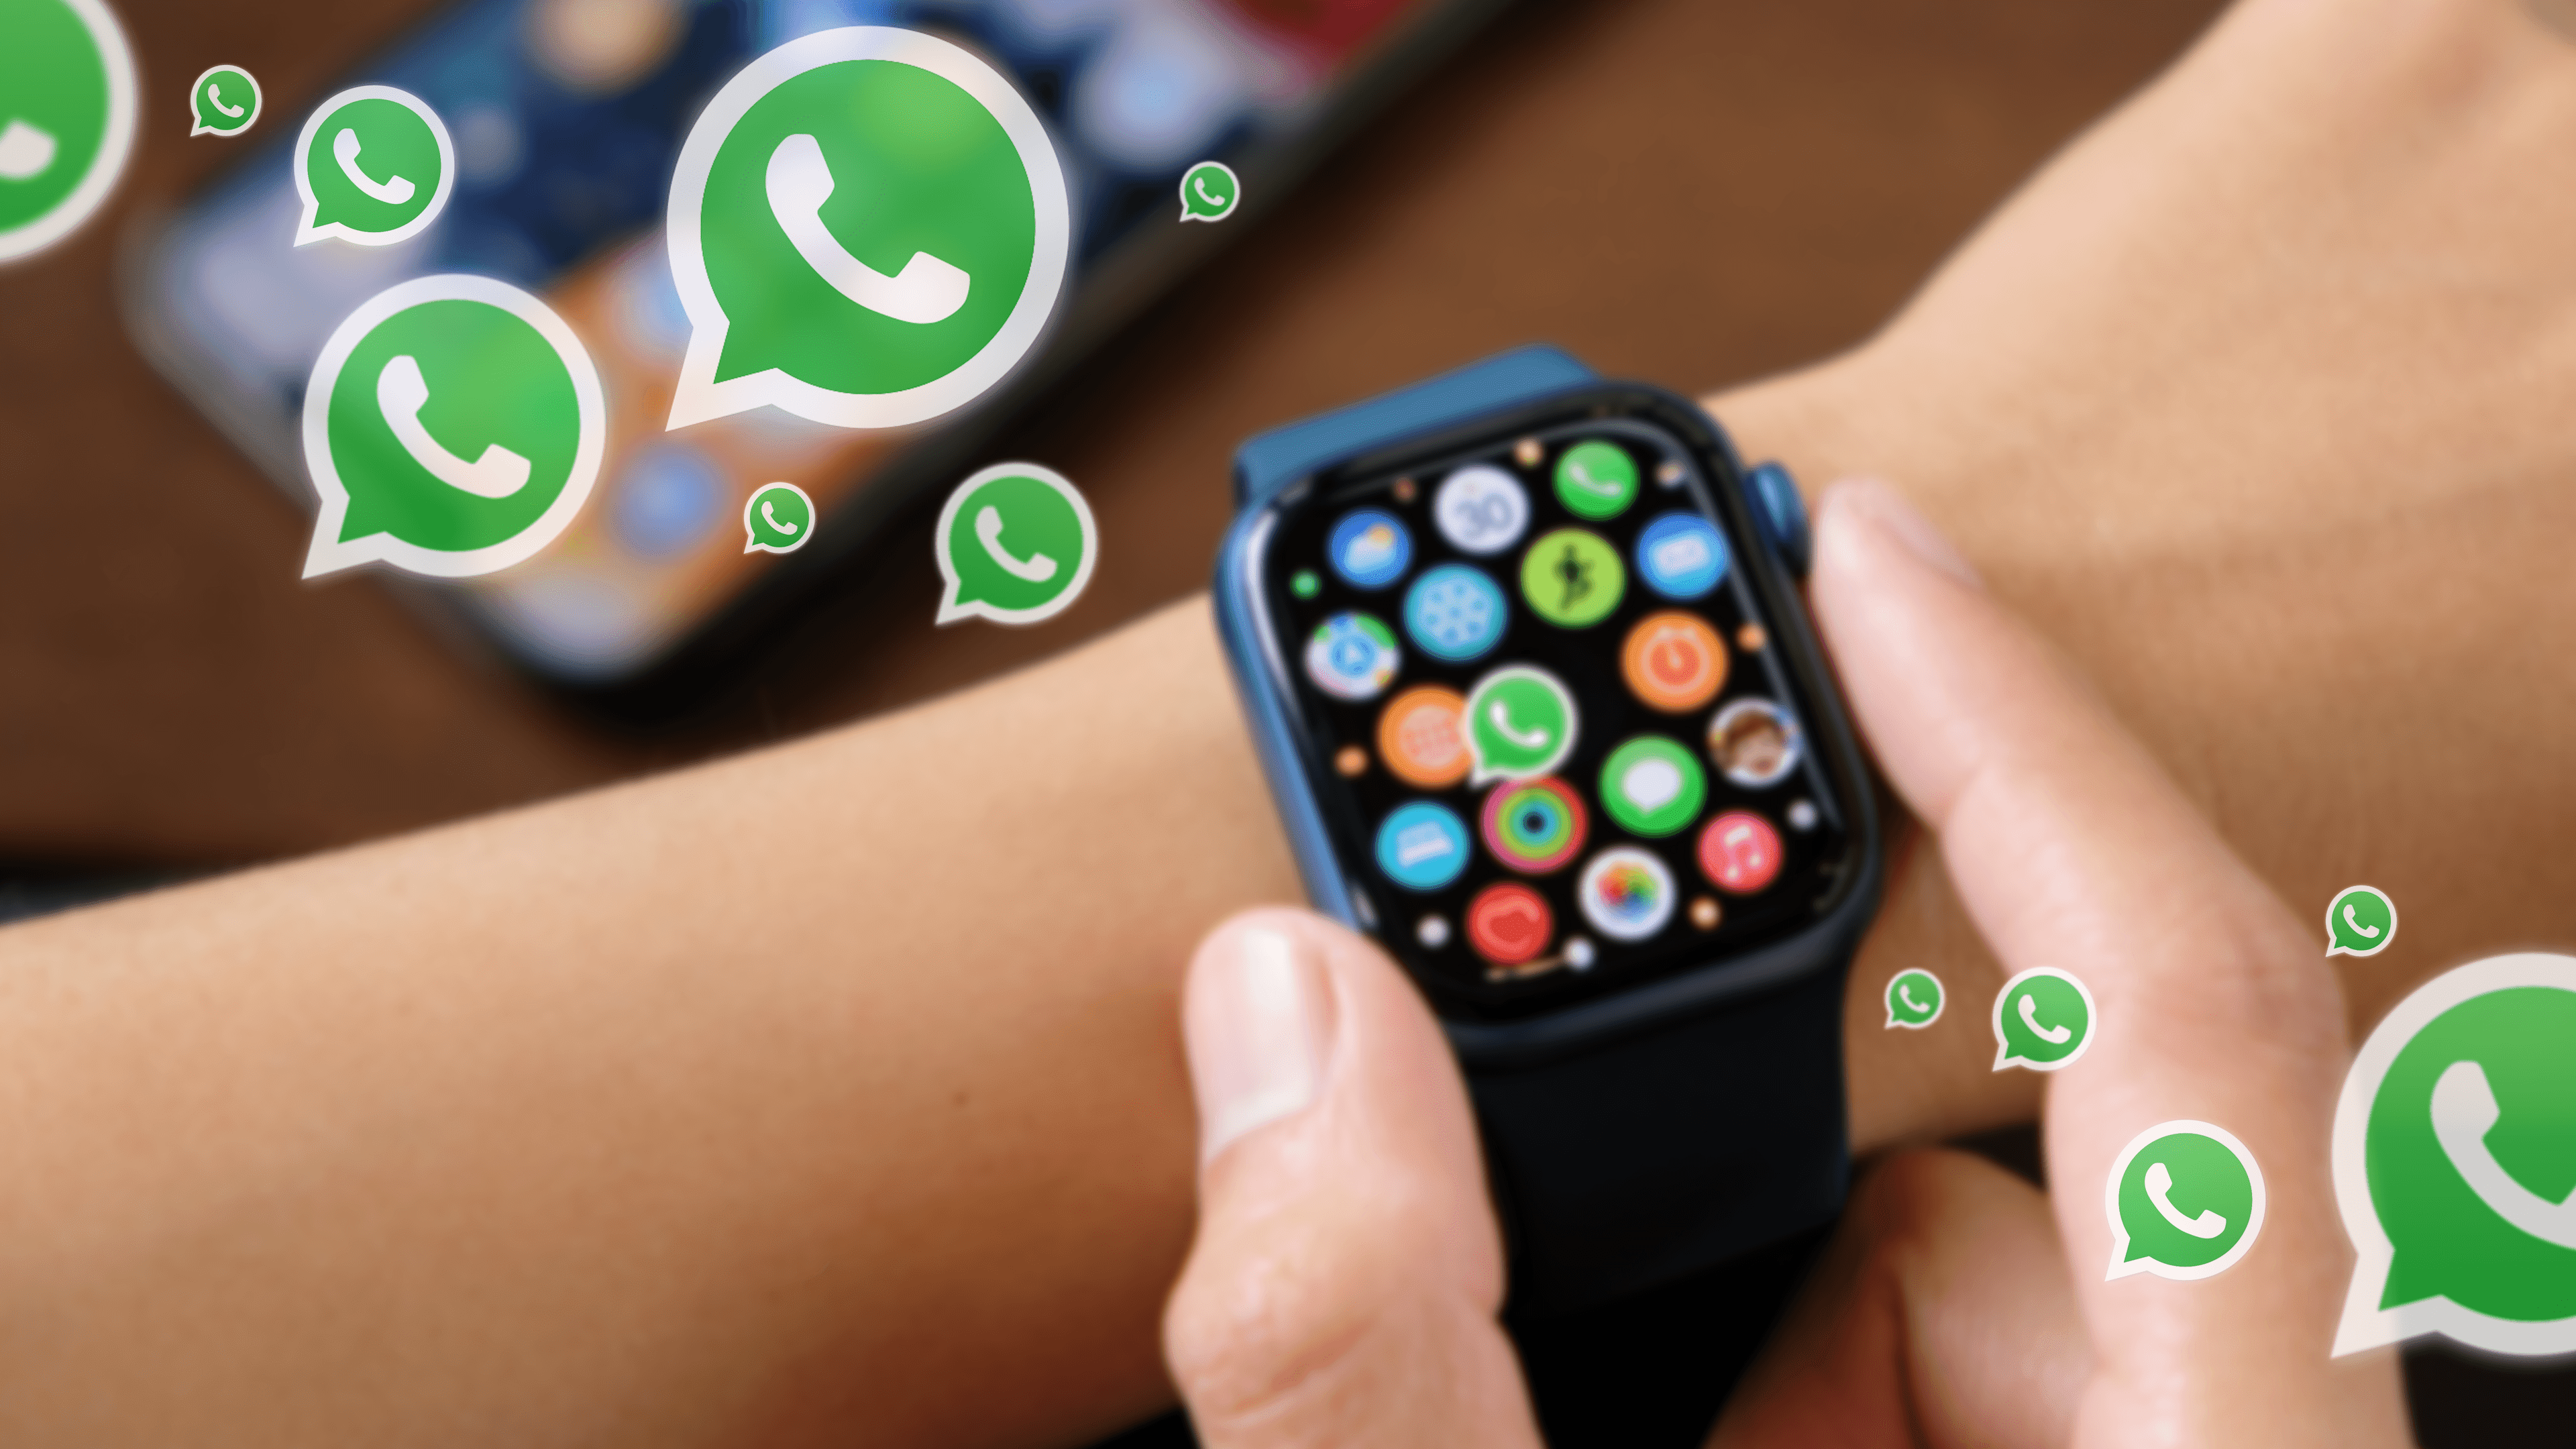 Whatsapp is now possible to use in Smart Watch